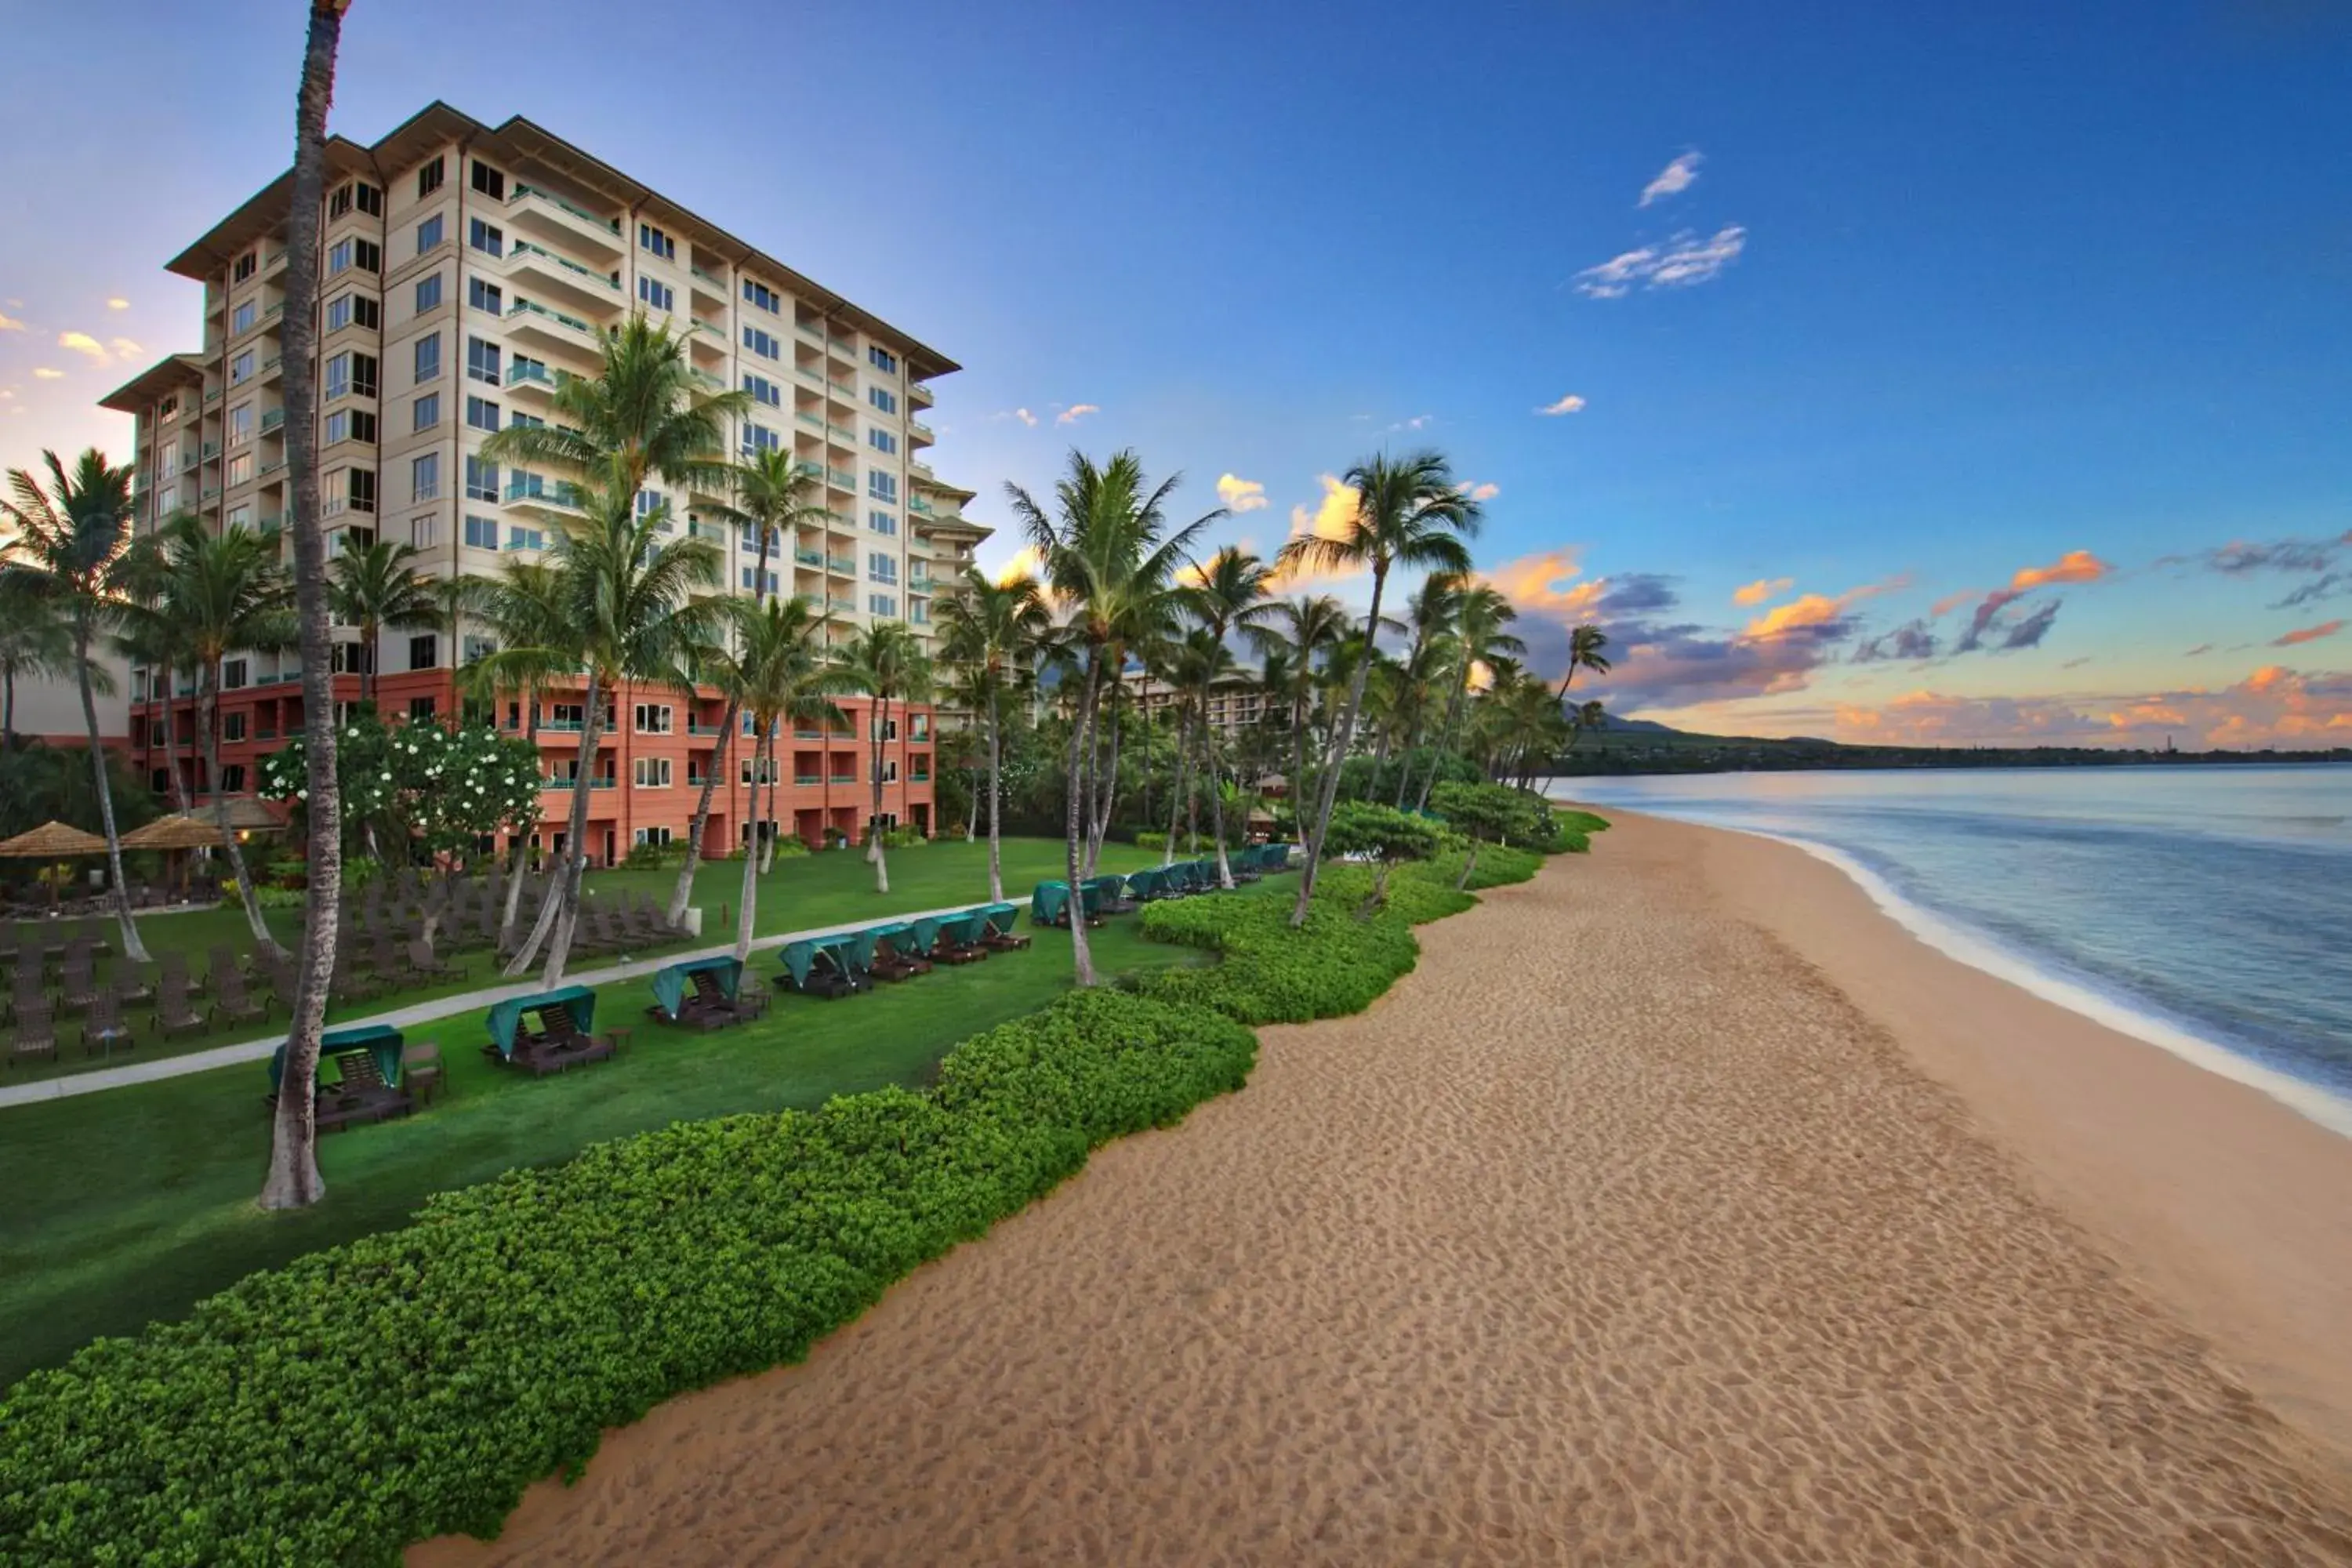 Property Building in Marriott's Maui Ocean Club  - Lahaina & Napili Towers